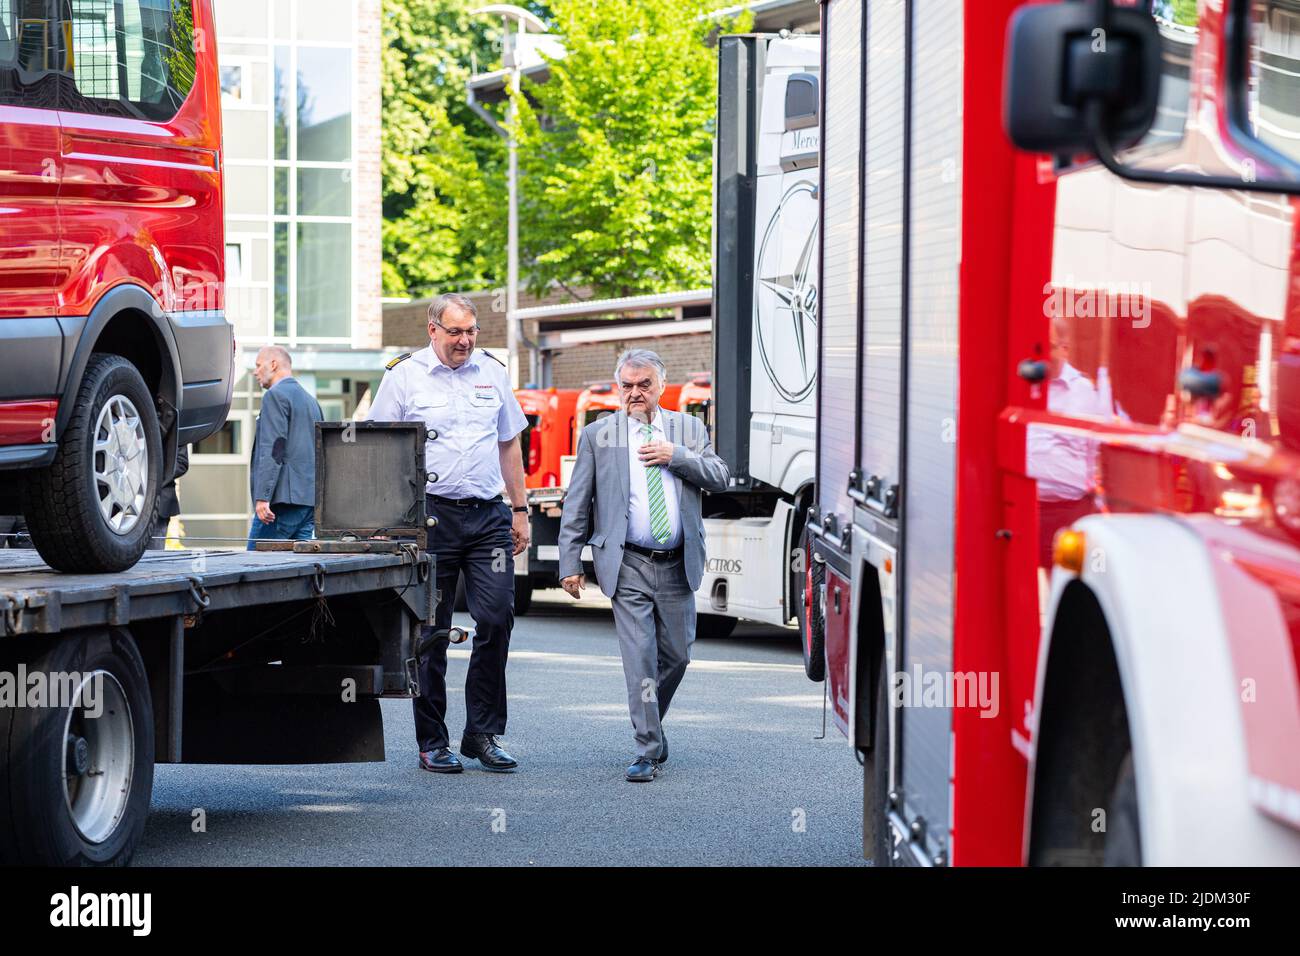 22 June 2022, North Rhine-Westphalia, Münster: Herbert Reul (CDU, r), Minister of the Interior of the State of North Rhine-Westphalia, hands over a total of 15 personnel carriers (MTF) and 1 auxiliary fire fighting group vehicle (HLF) with Berthold Penkert, Director of the Institute of Firefighters NRW (IDF) for transport to Ukraine. The state is donating 15 decommissioned personnel carriers and one fire fighting group vehicle. The oldest vehicle was taken out of service in 2010. The donations are part of the inventory of the Institute of Firefighters (IdF) based in Münster. Photo: Guido Kirch Stock Photo